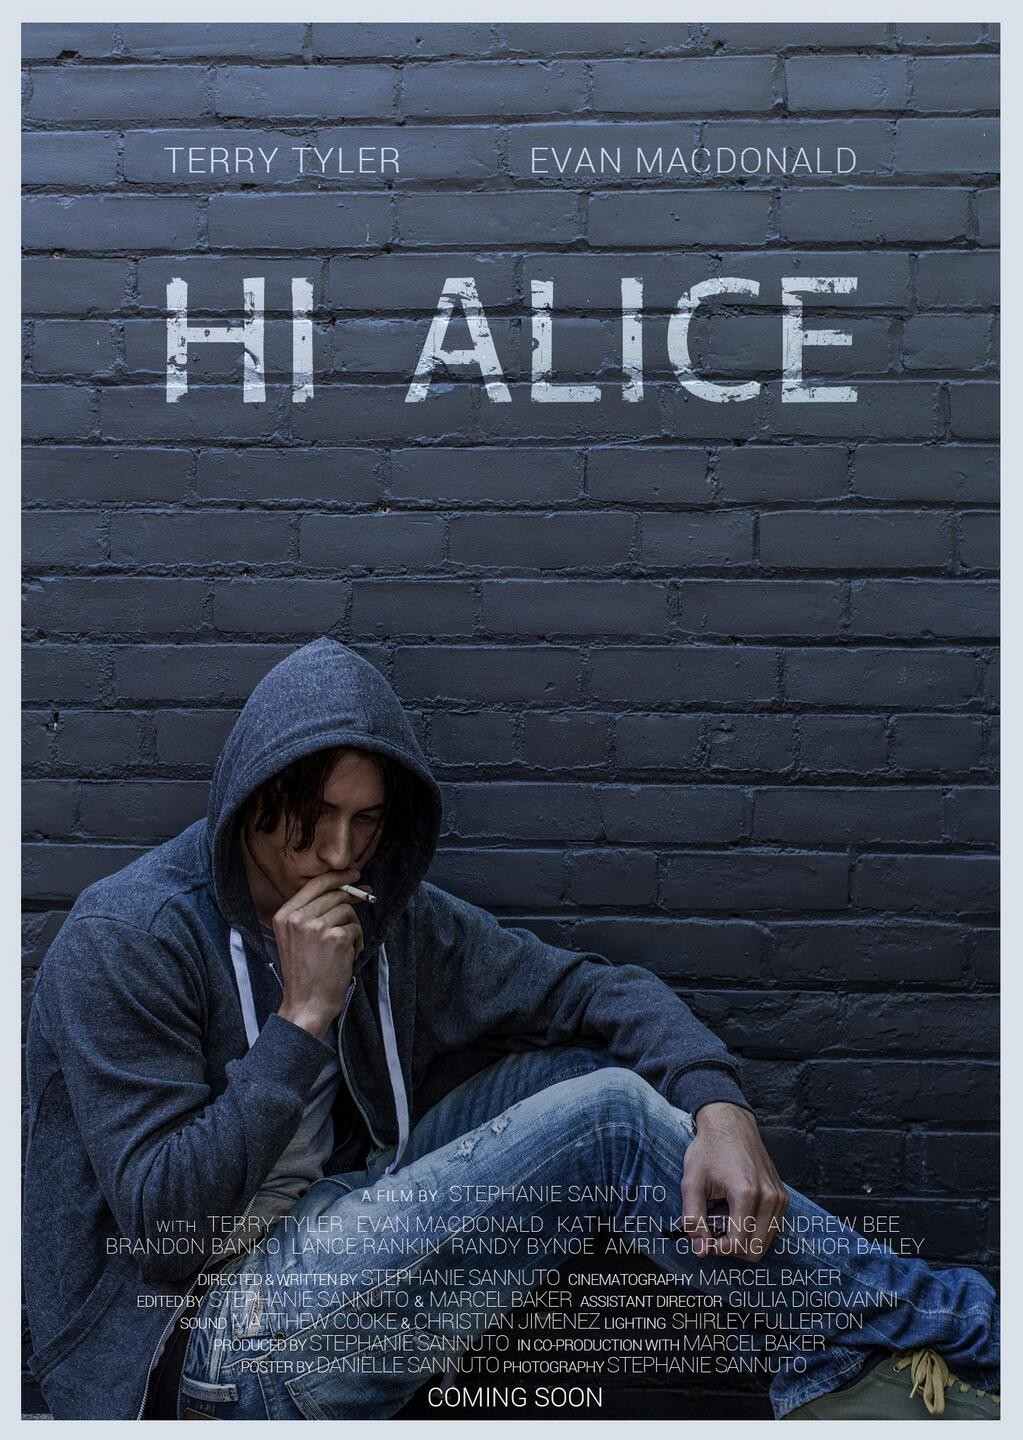 Extra Large Movie Poster Image for Hi Alice